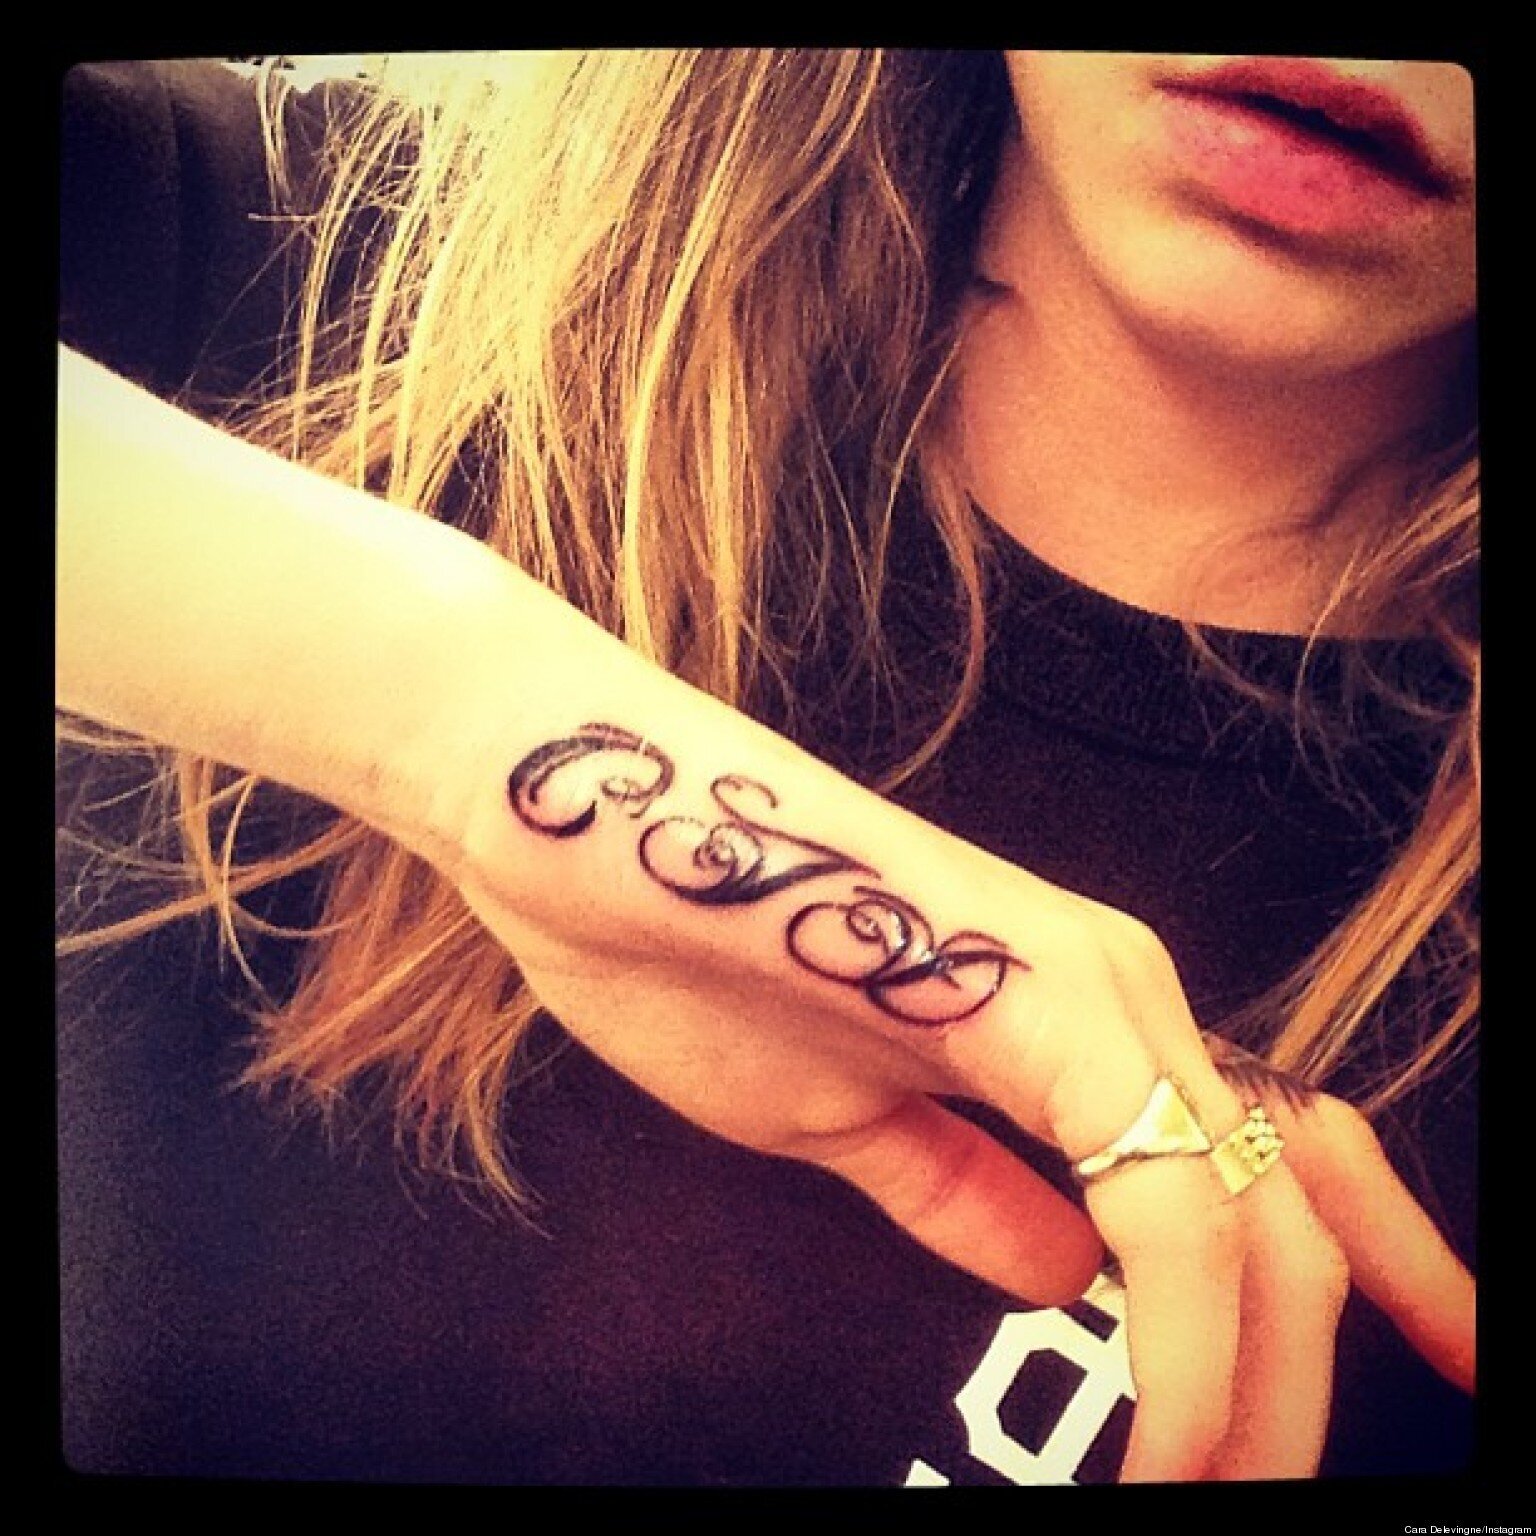 Most Popular Tattoos And Their Meanings